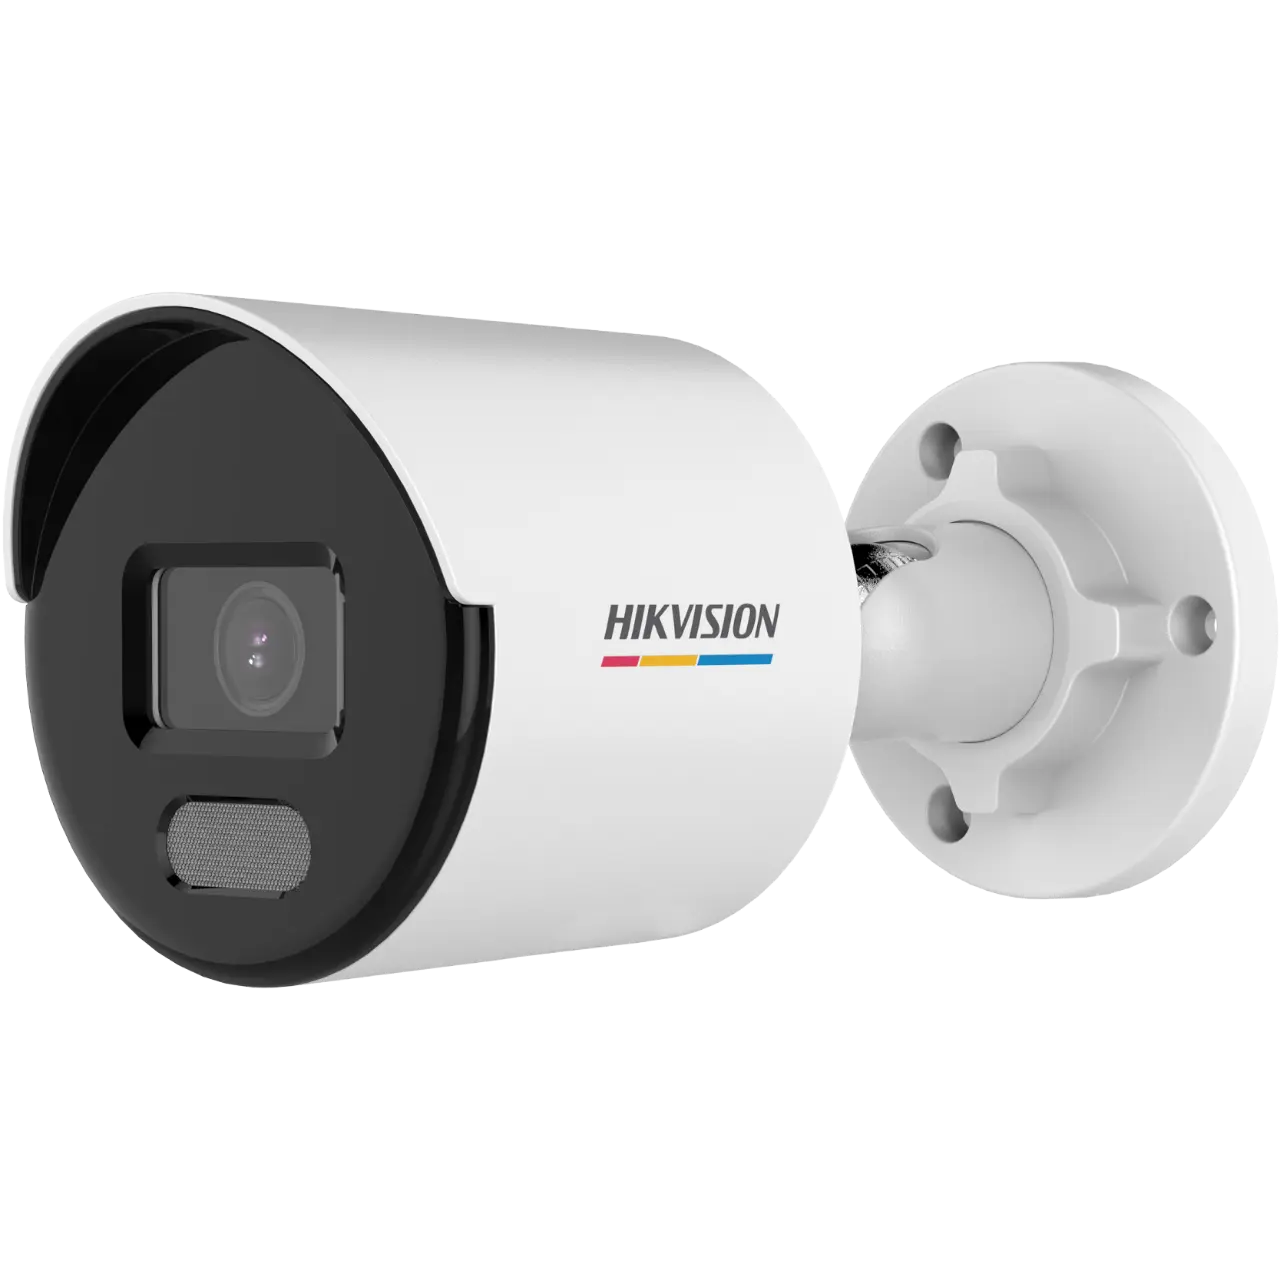 Hikvision DS-2CD1047G0-L(2.8mm)(C)(O-STD) , 4 MP ColorVu Fixed Bullet Network Camera , High quality imaging with 4 MP resolution